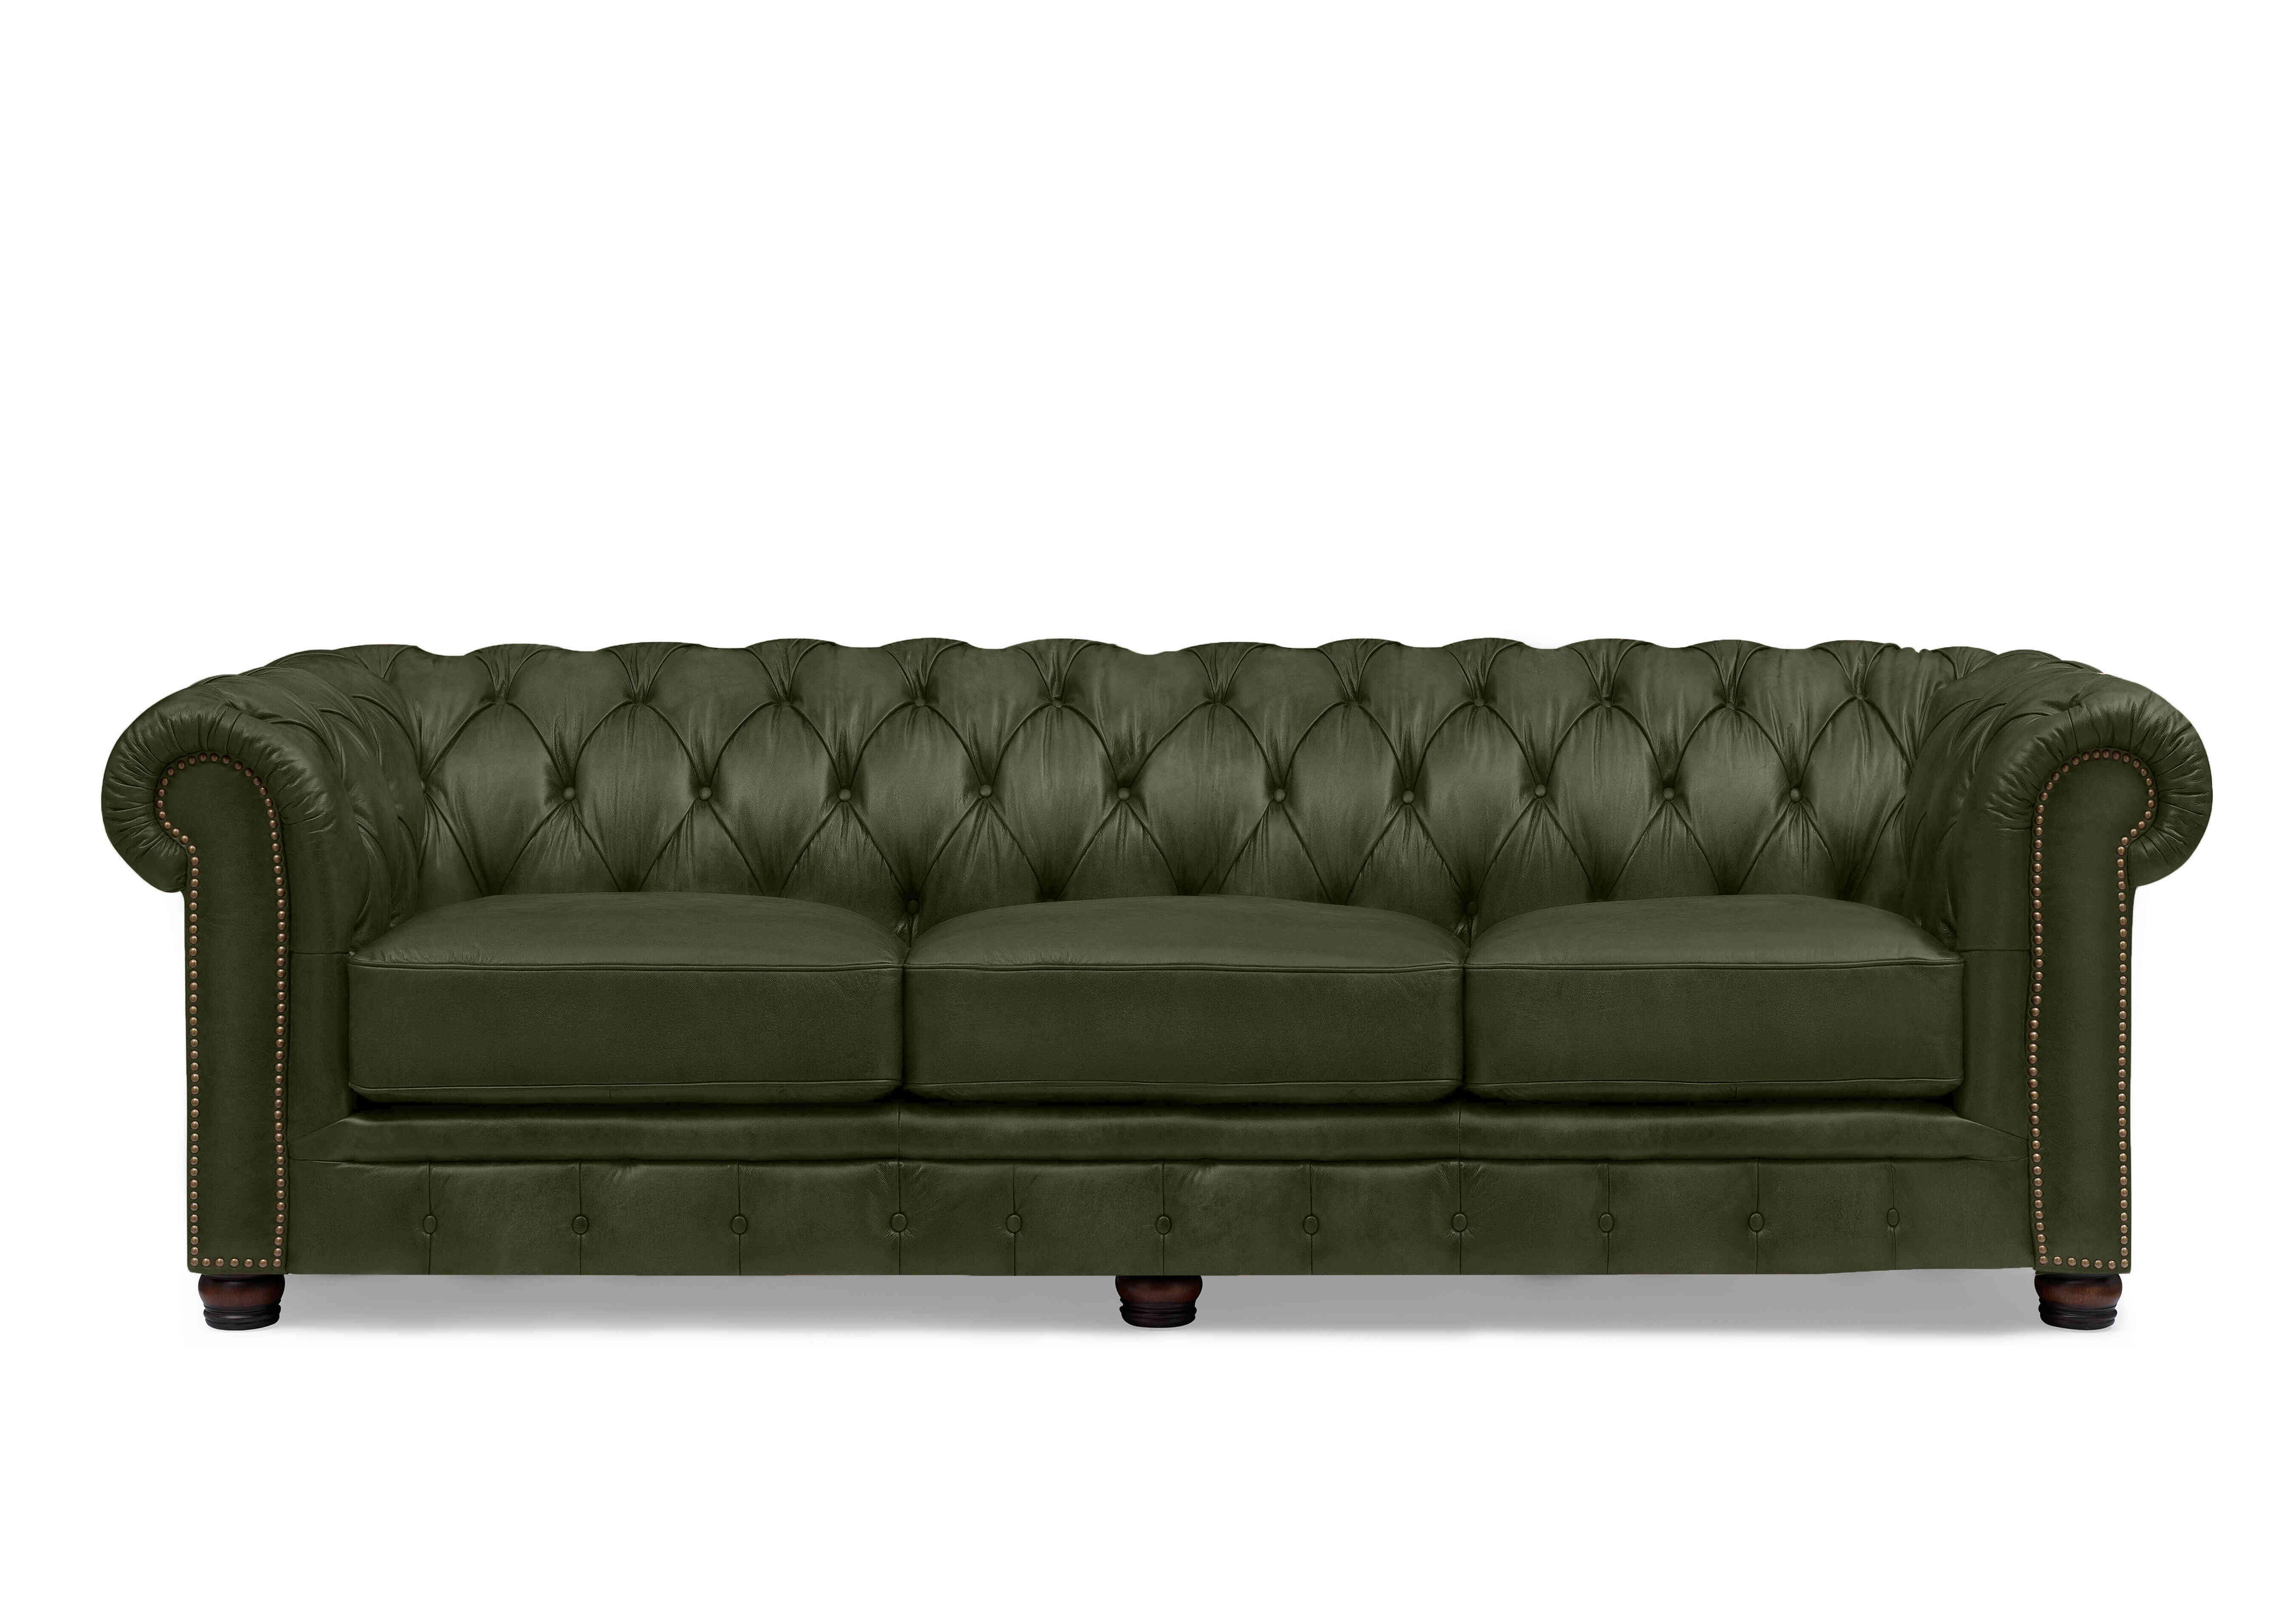 Shackleton 4 Seater Leather Chesterfield Sofa with USB-C in X3y1-1965ls Emerald on Furniture Village